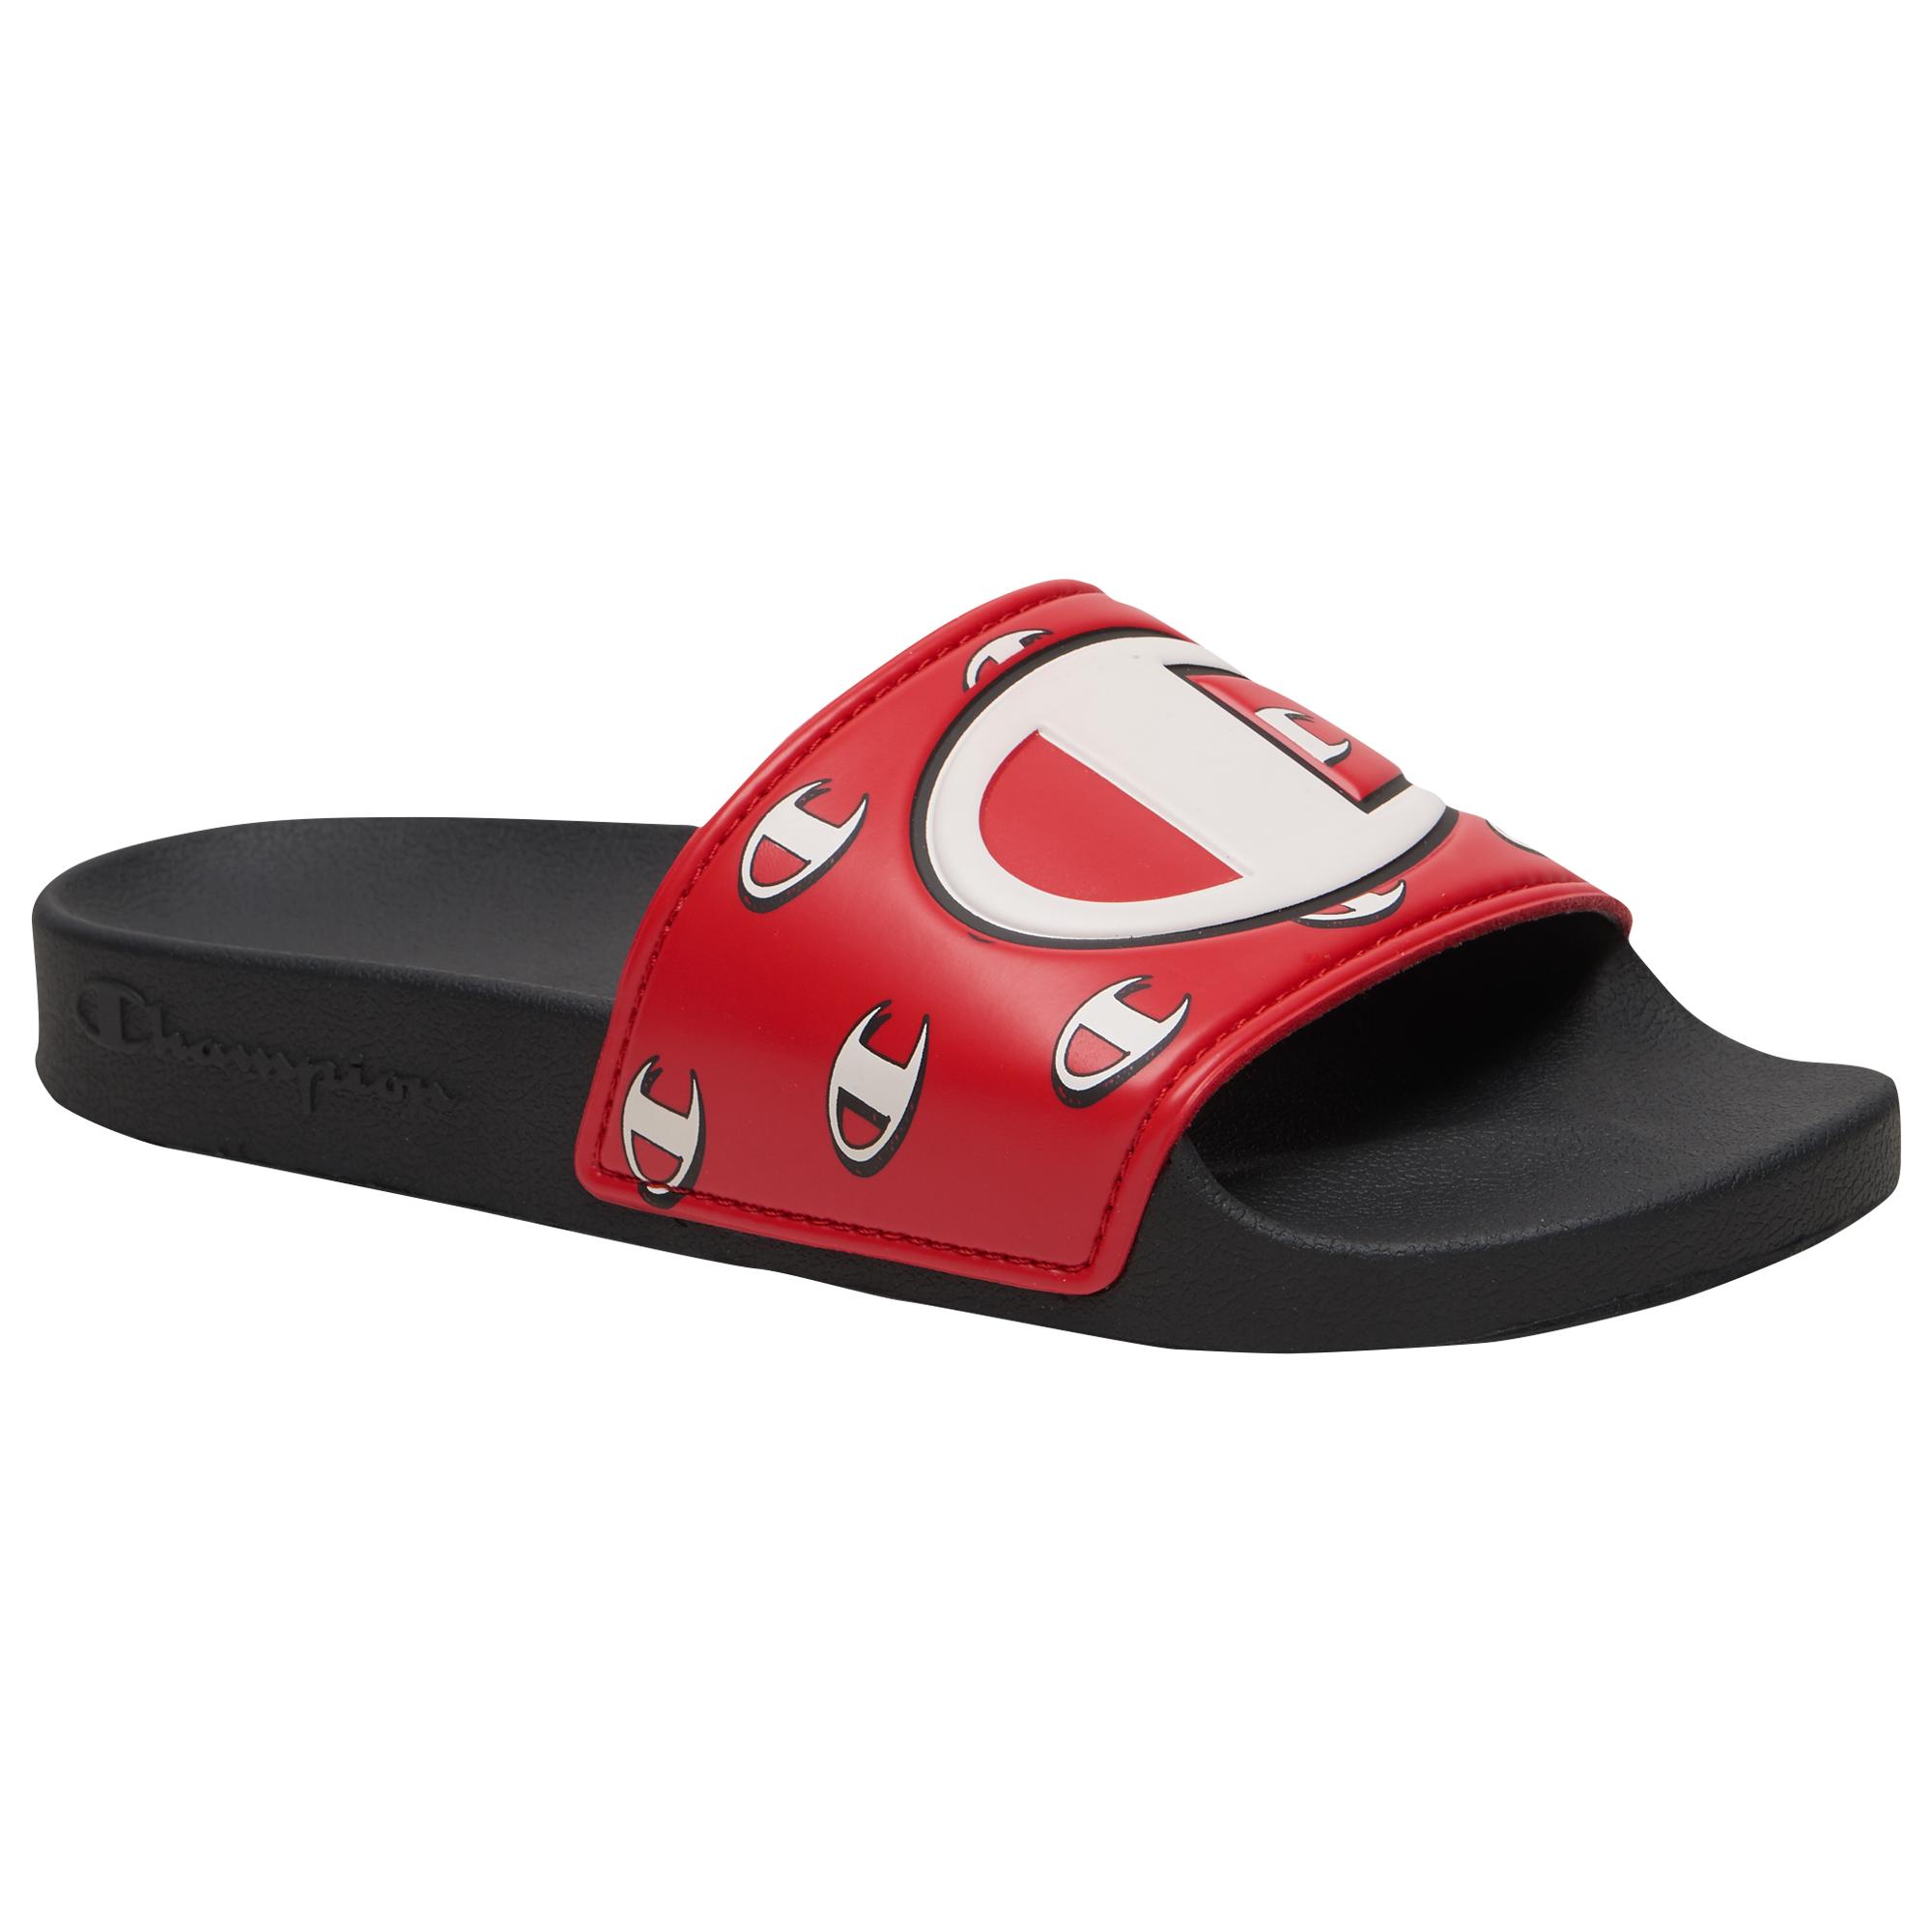 Champion Ipo Repeat C Slides in Red/Black (Red) for Men - Lyst